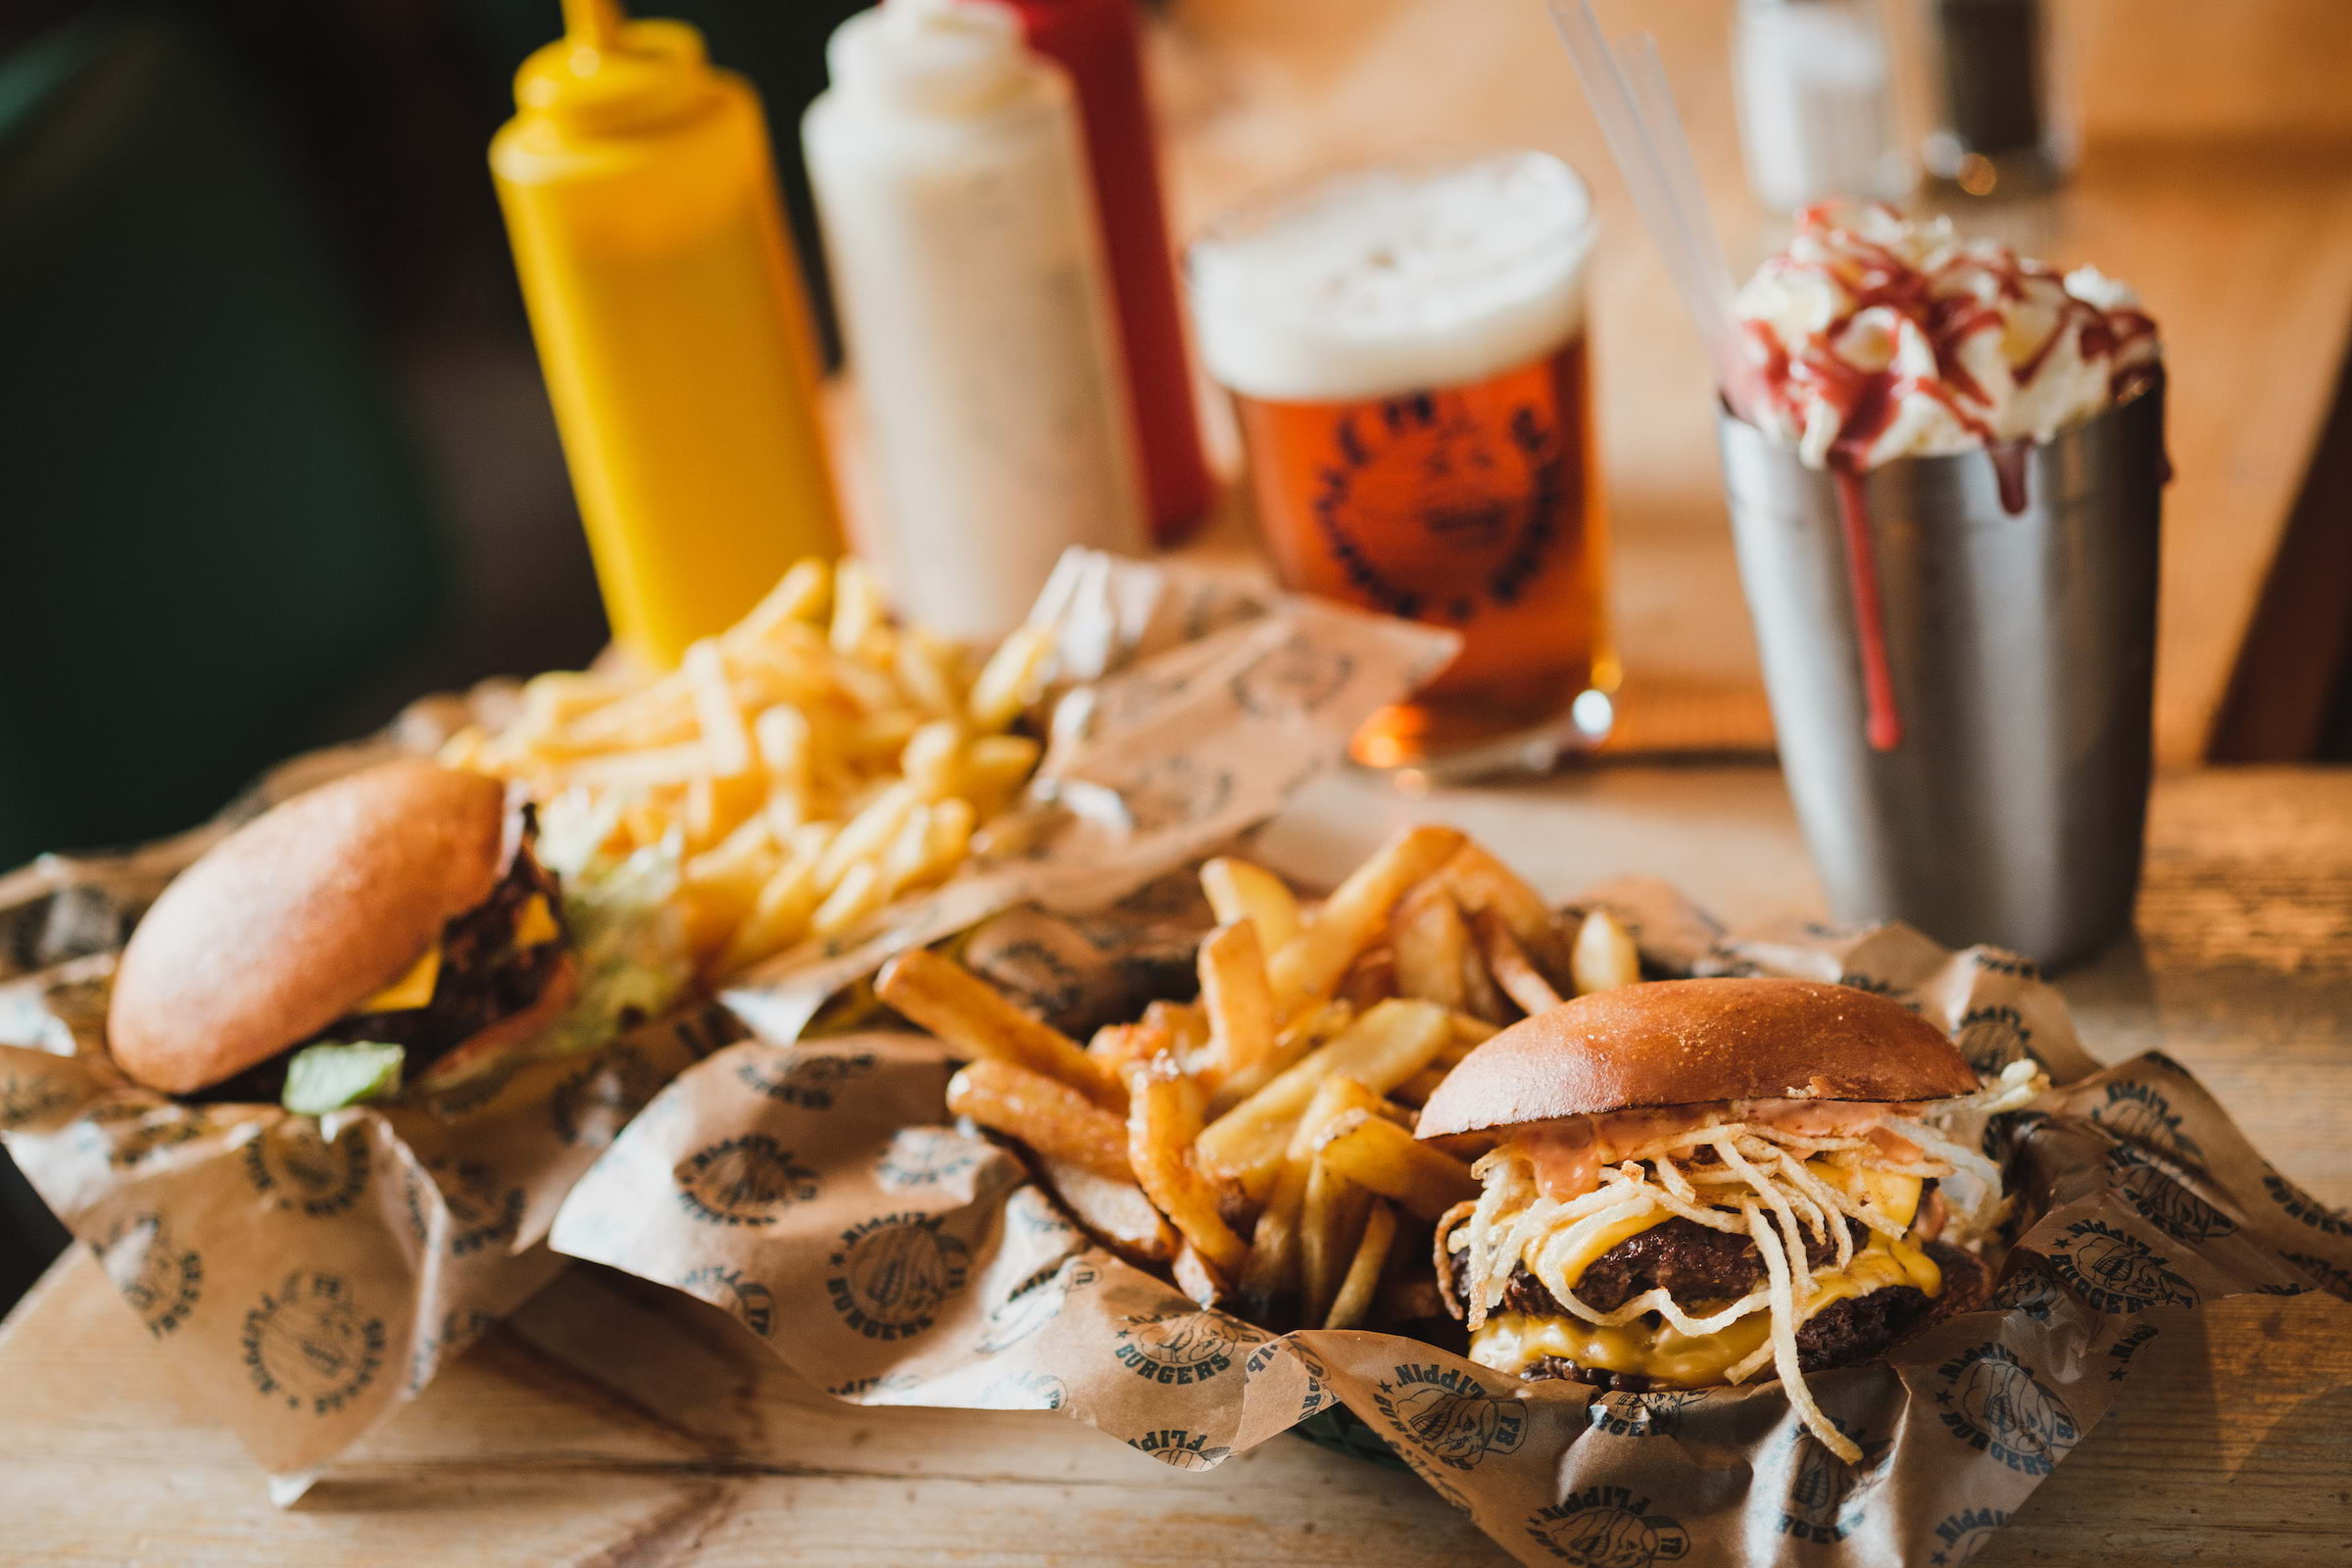 The guide to Stockholm's best fast food